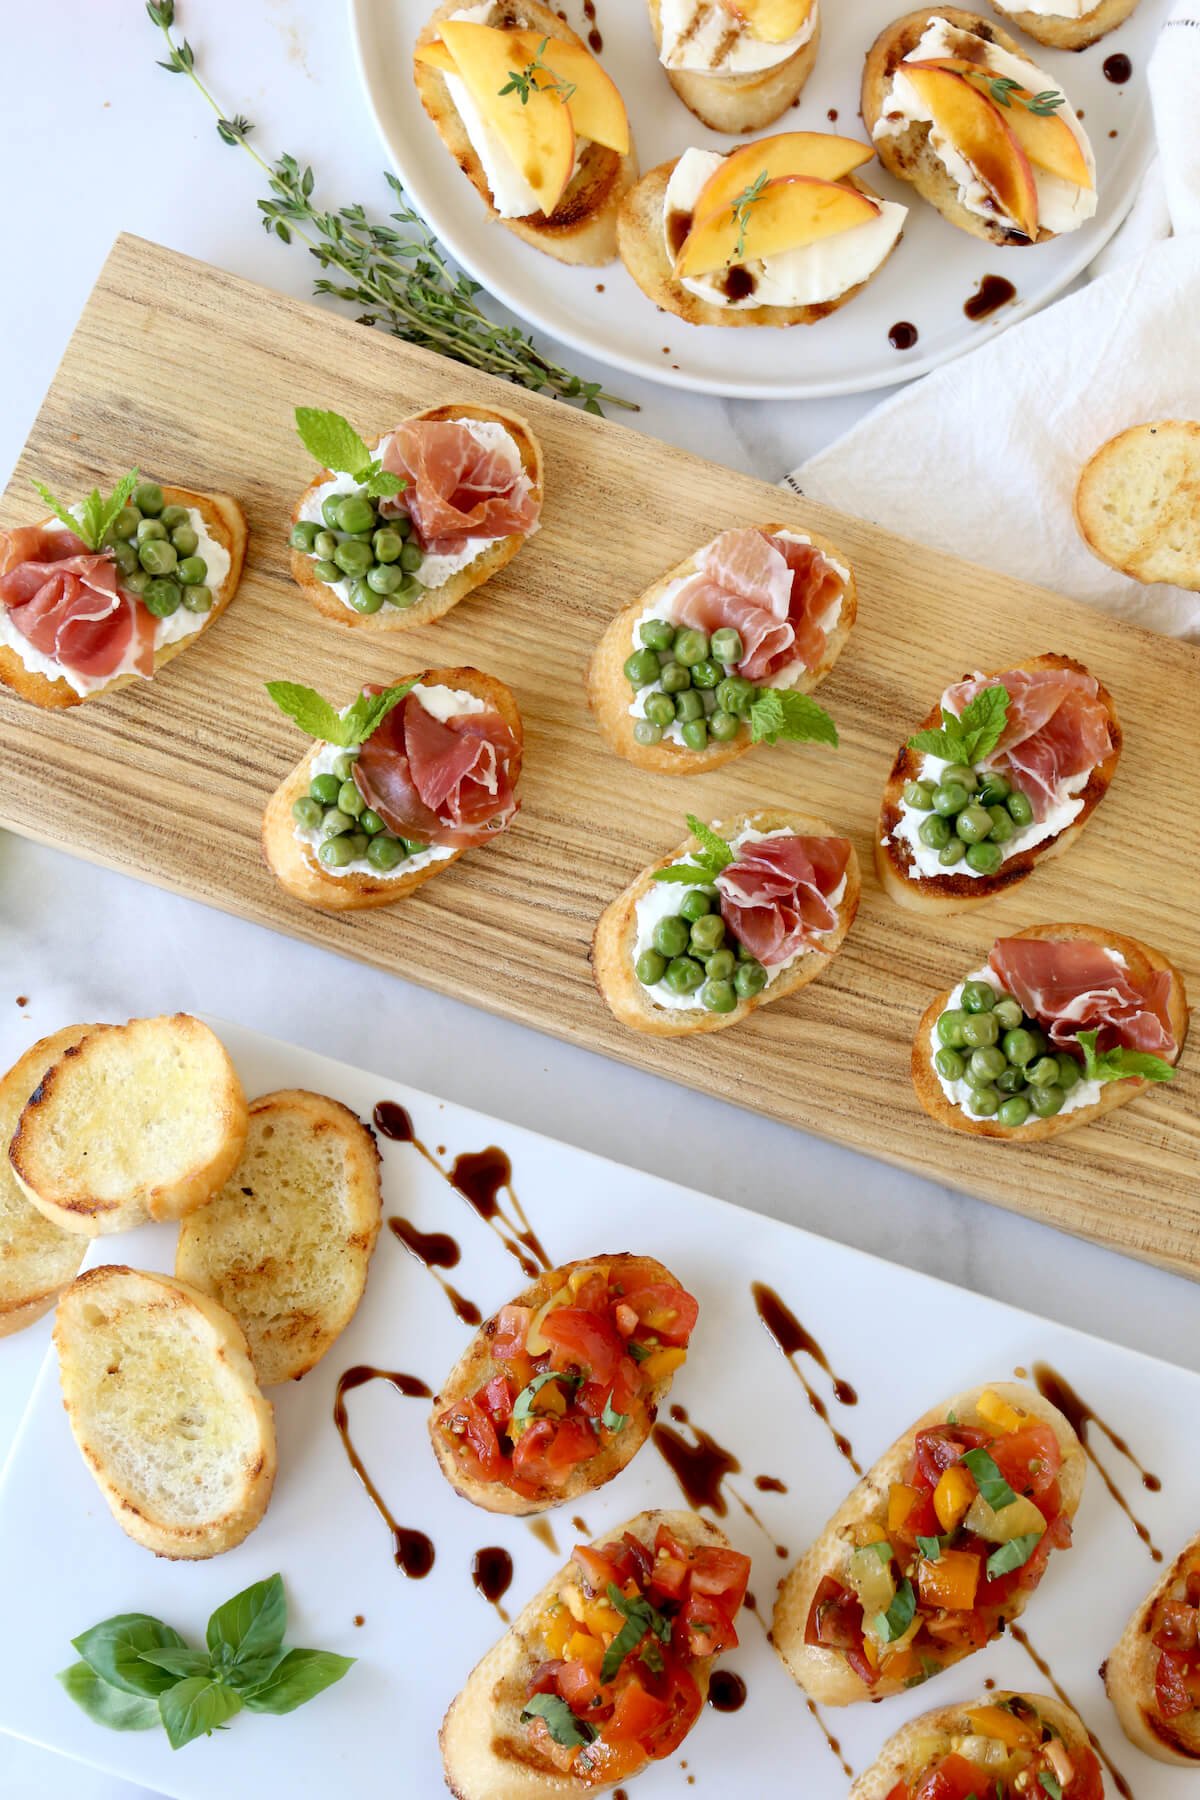 Three platter of assorted bruschetta, toasted bread with tomatoes, peas, prosciutto and peaches.  